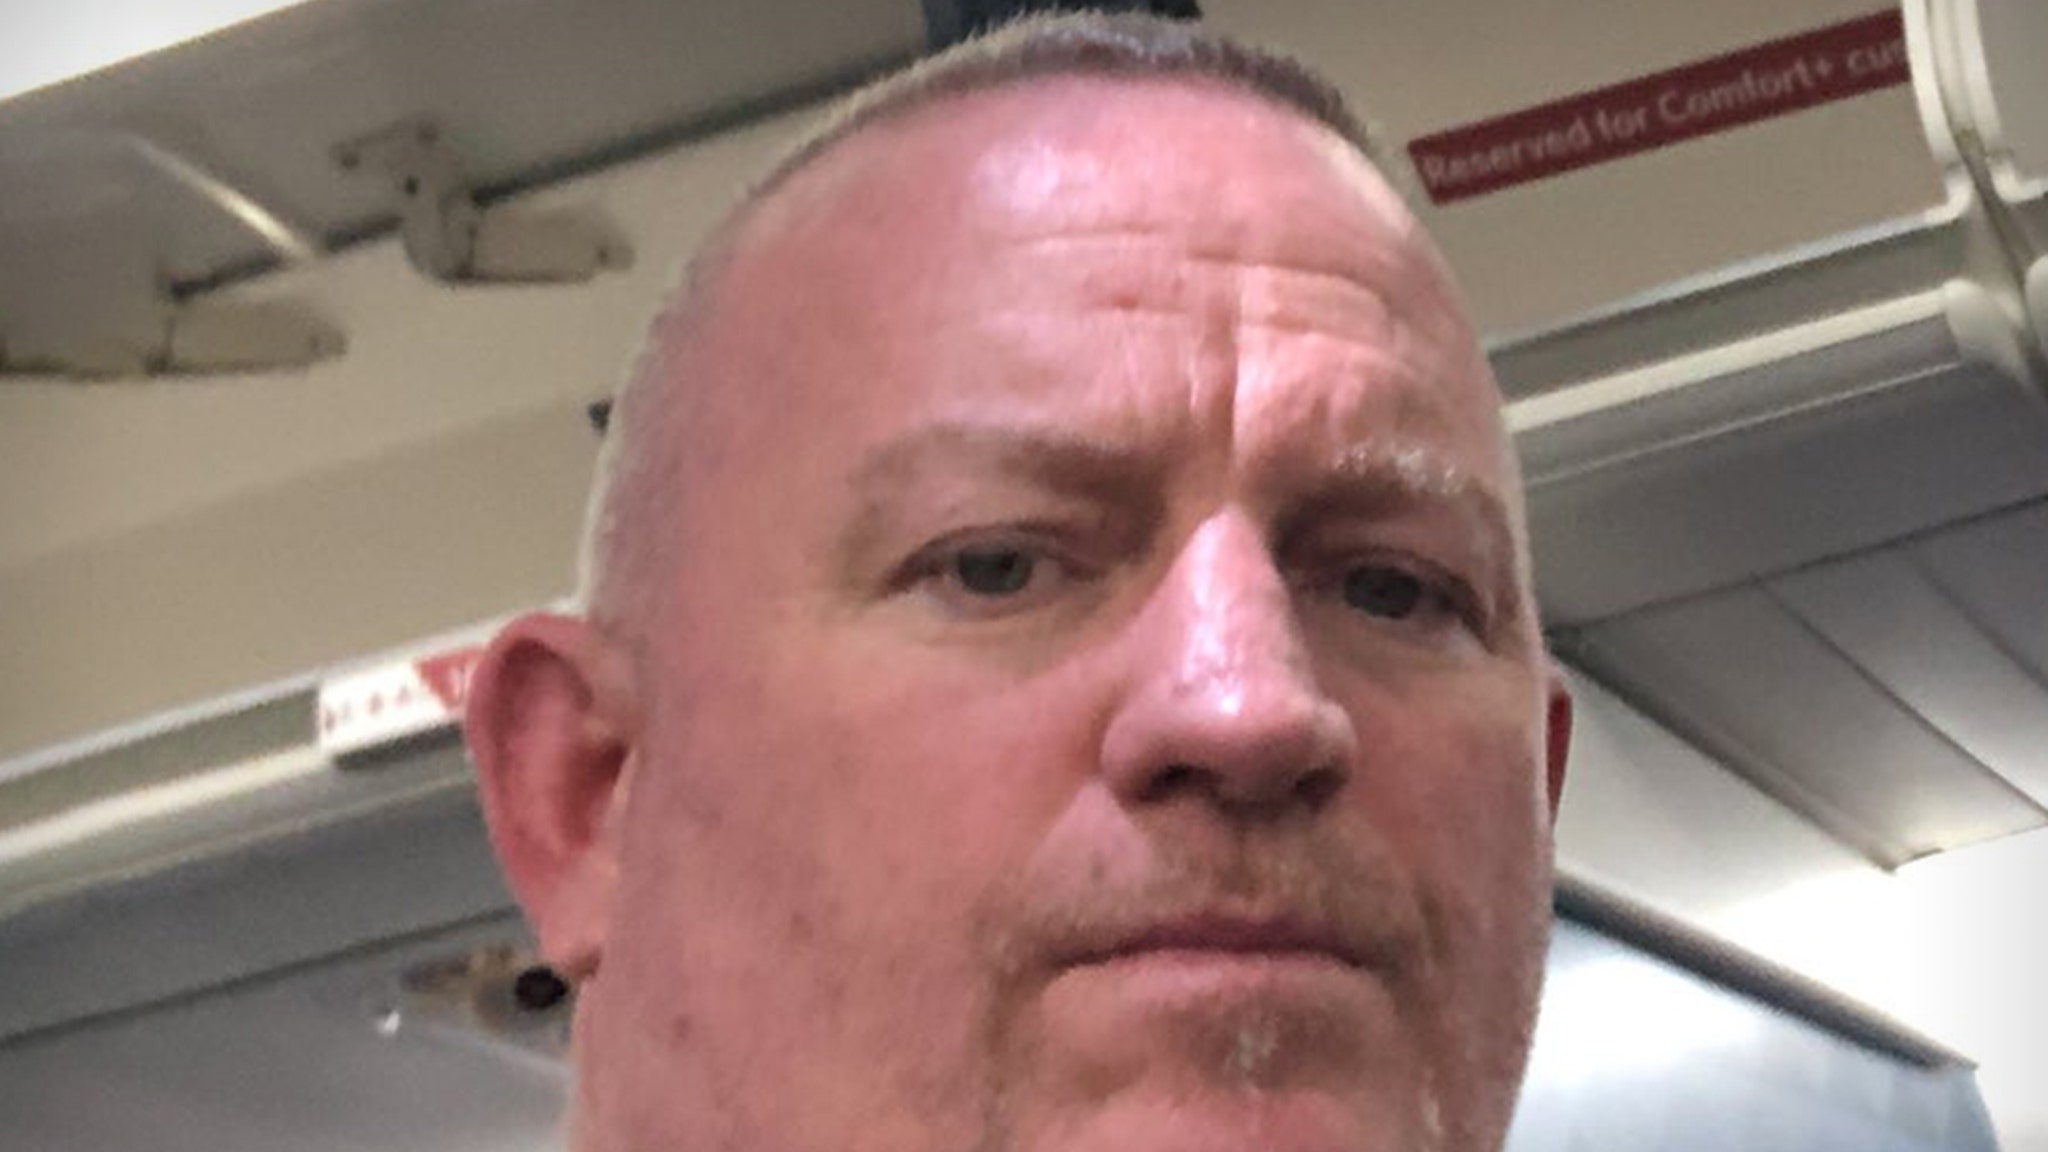 WWE Road Dogg hospitalized after suffering heart attack, says wife